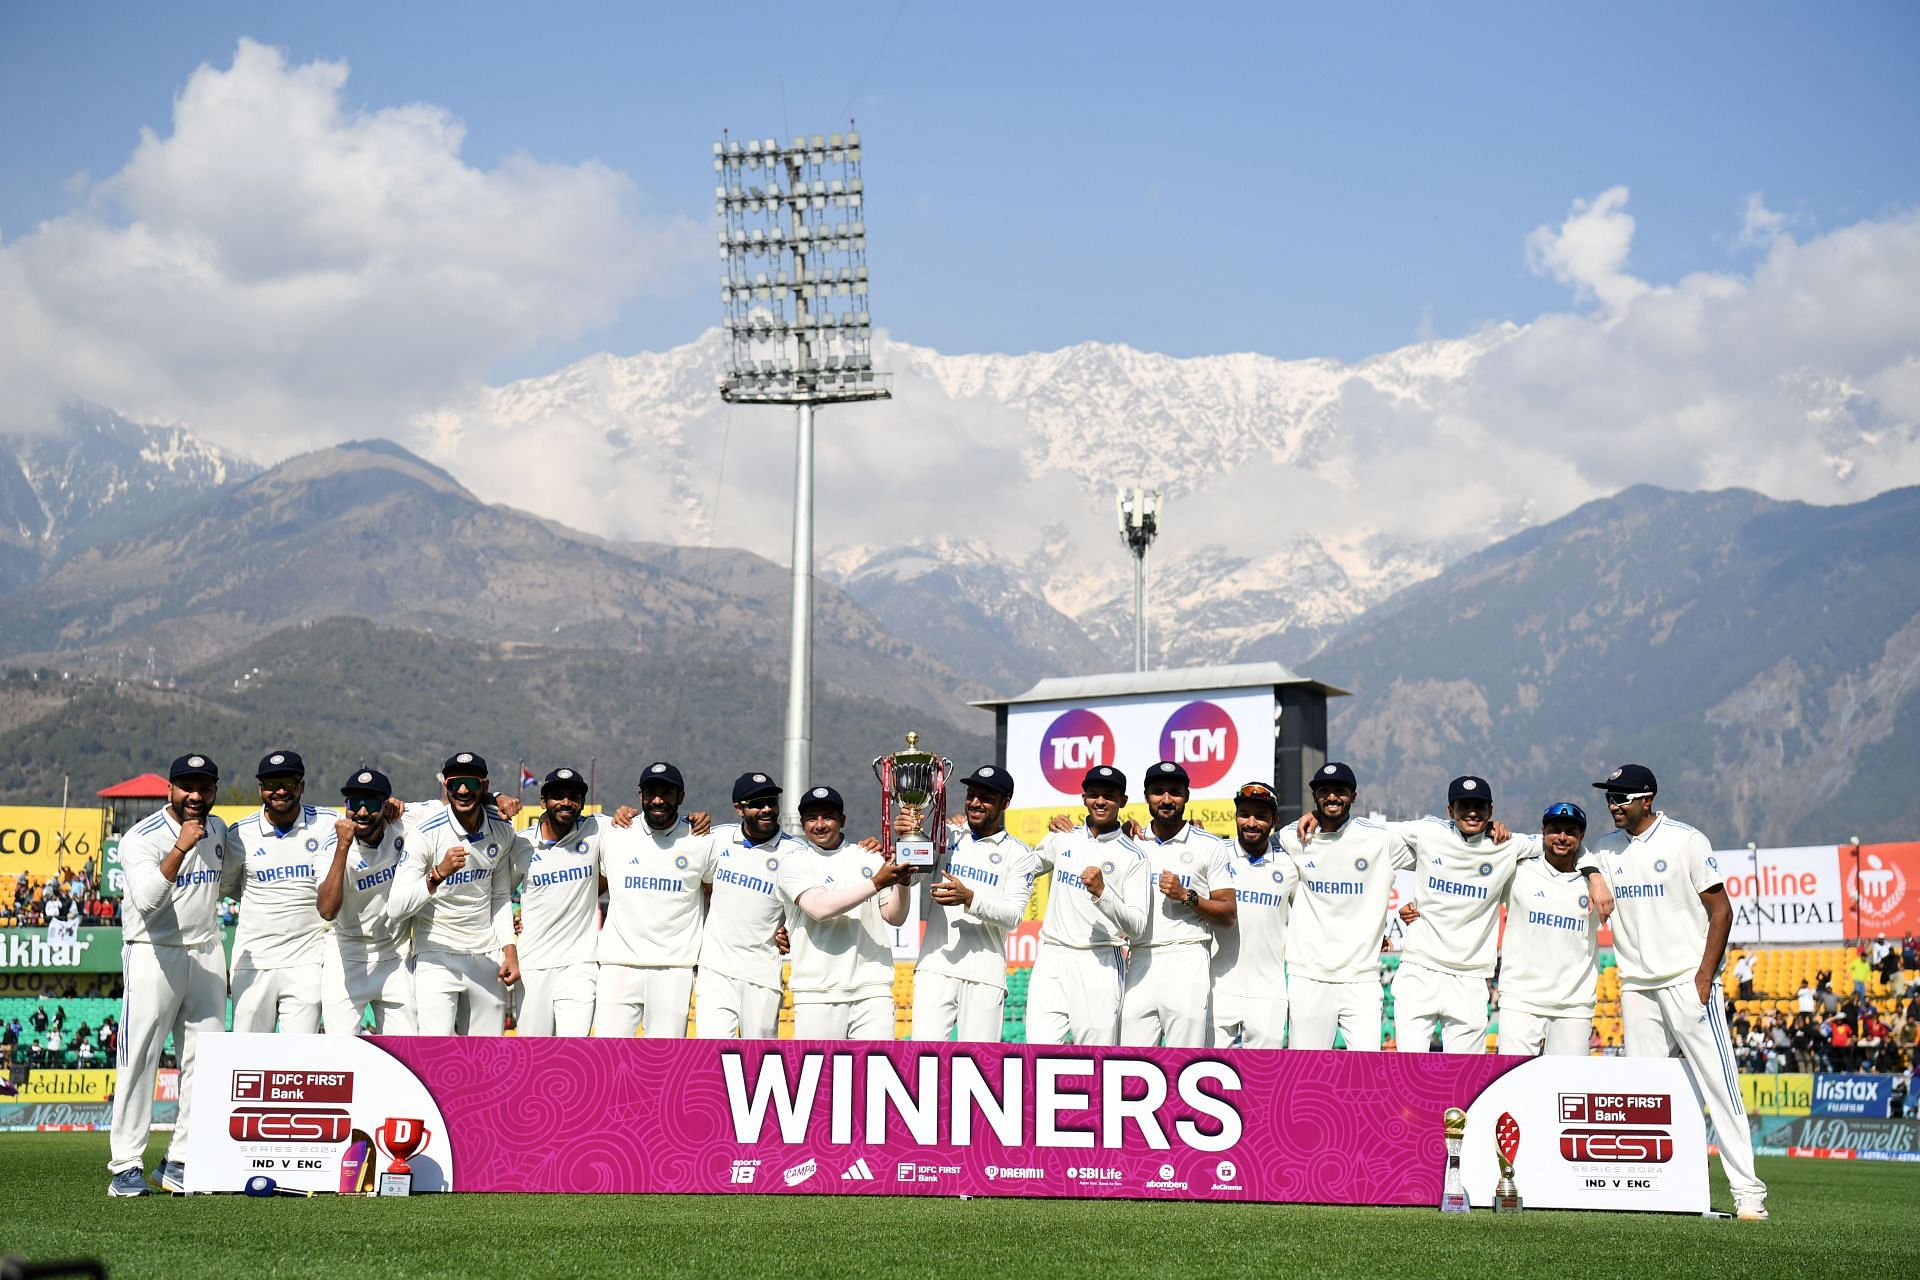 Team India decimated England in under three days in the final Test to win the series 4-1.